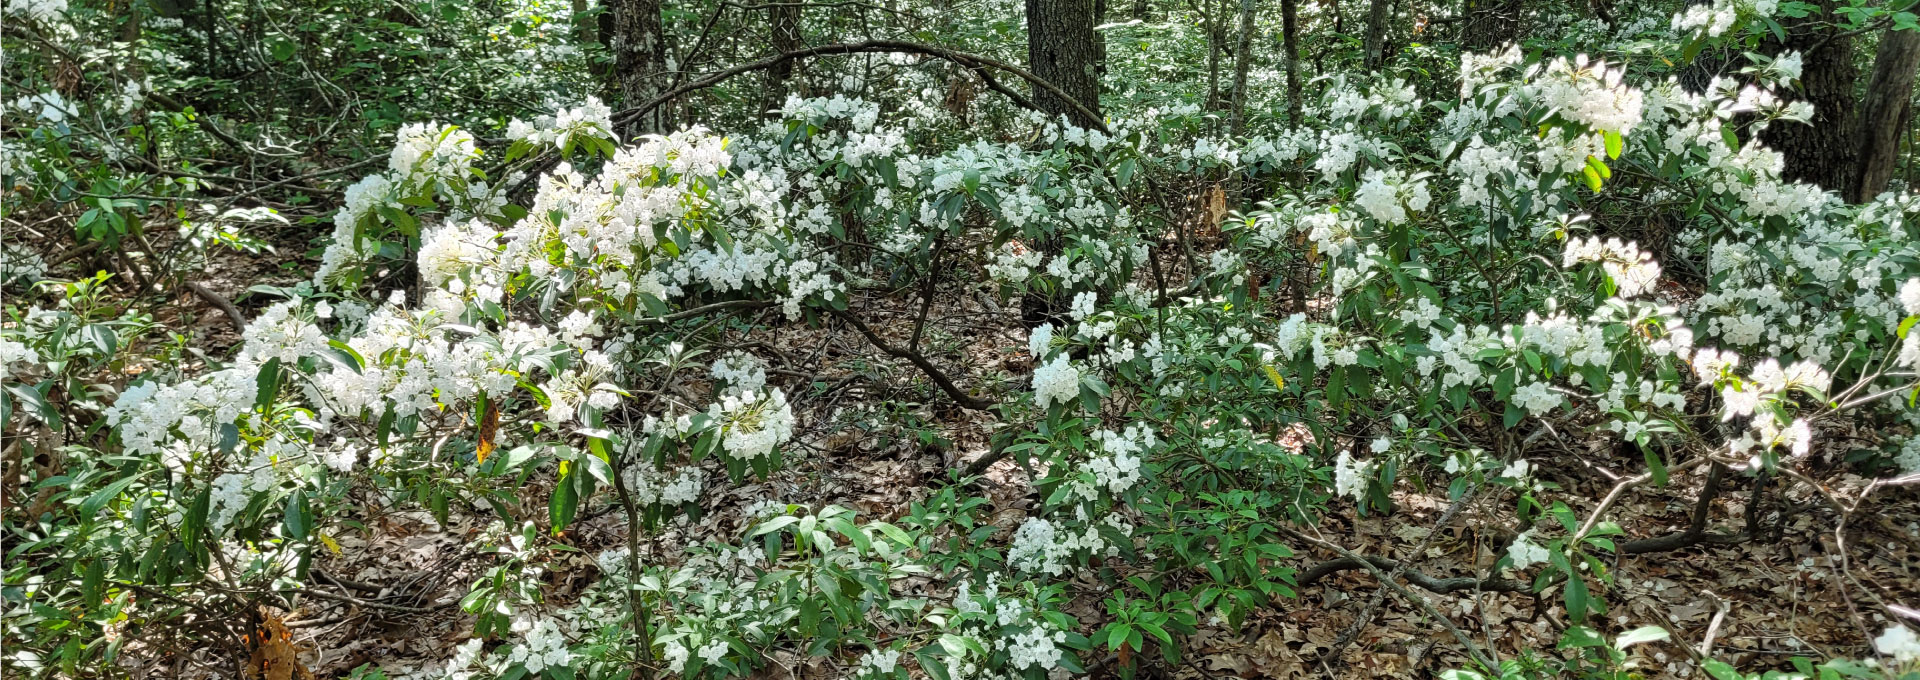 A thicket of mountain laurel in bloom